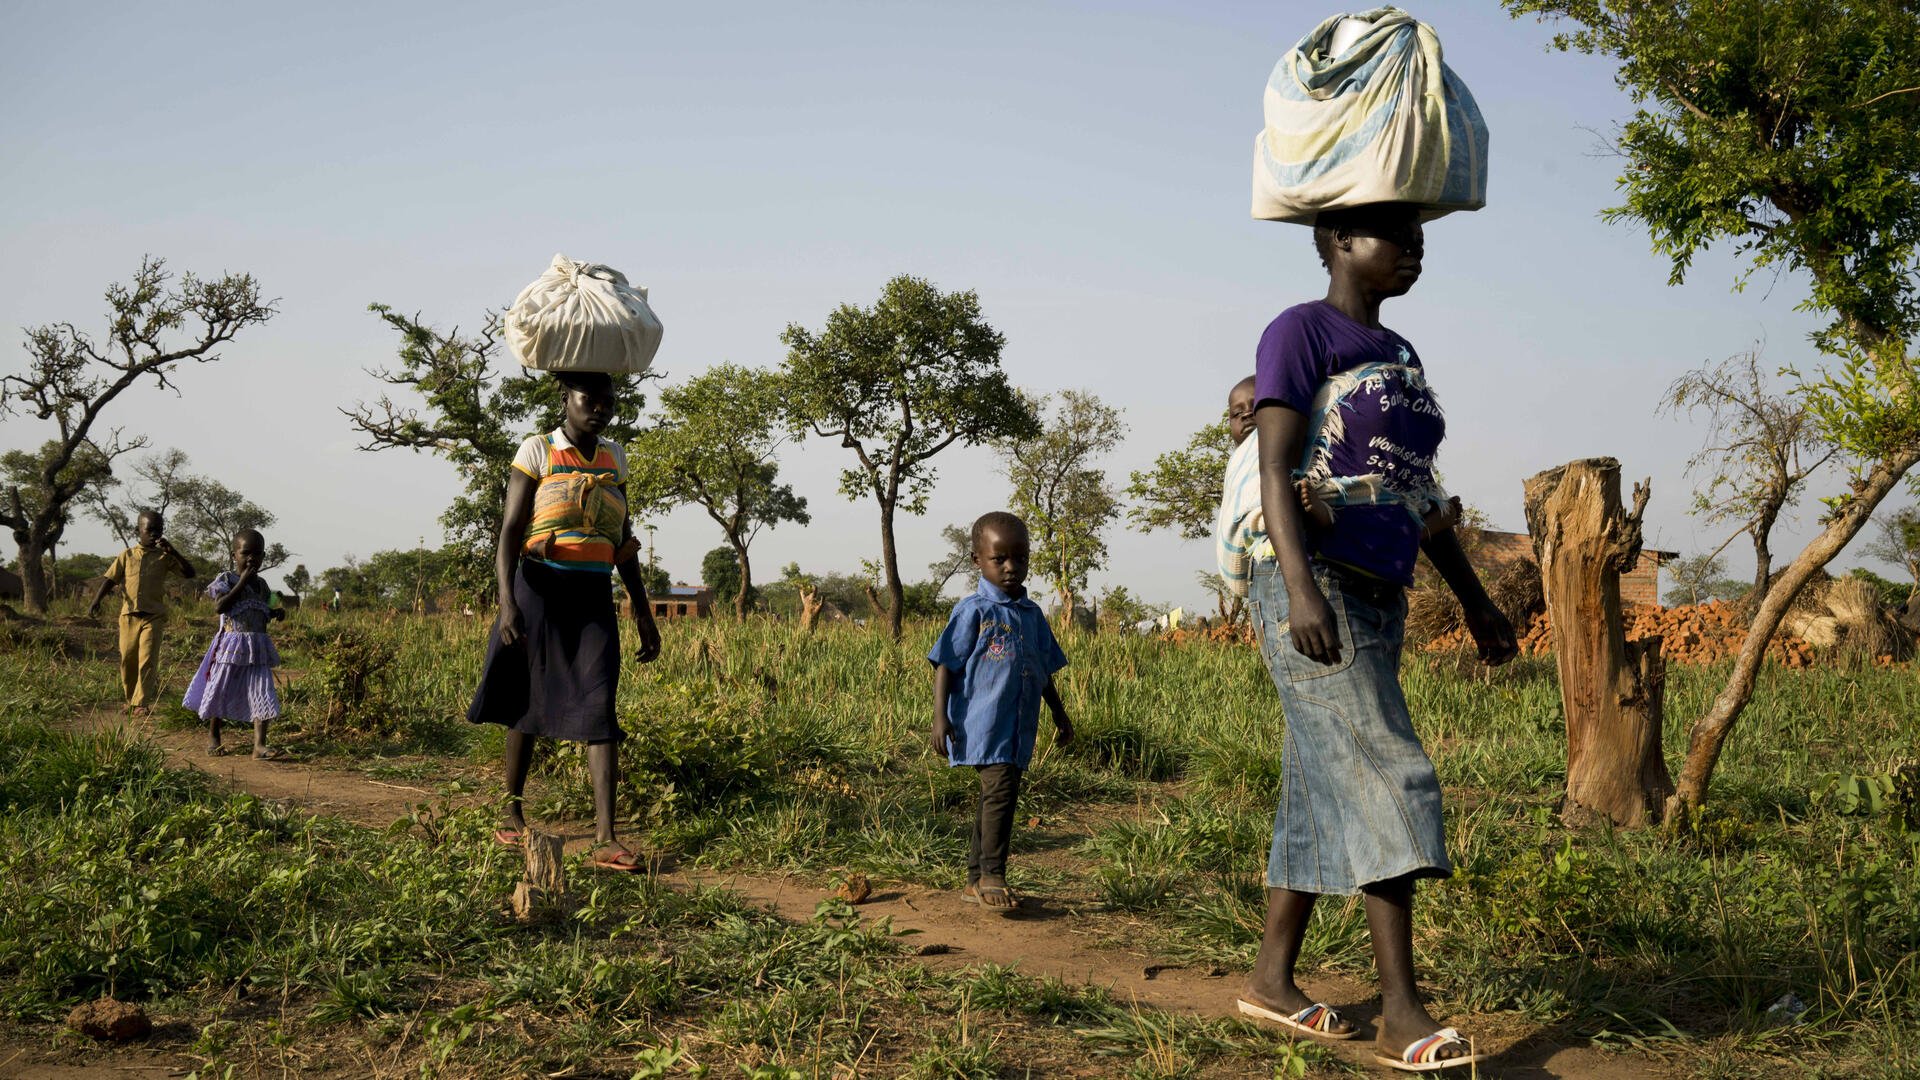 Women and their children arrive from Yei, South Sudan on foot, into the border town of Bosia,